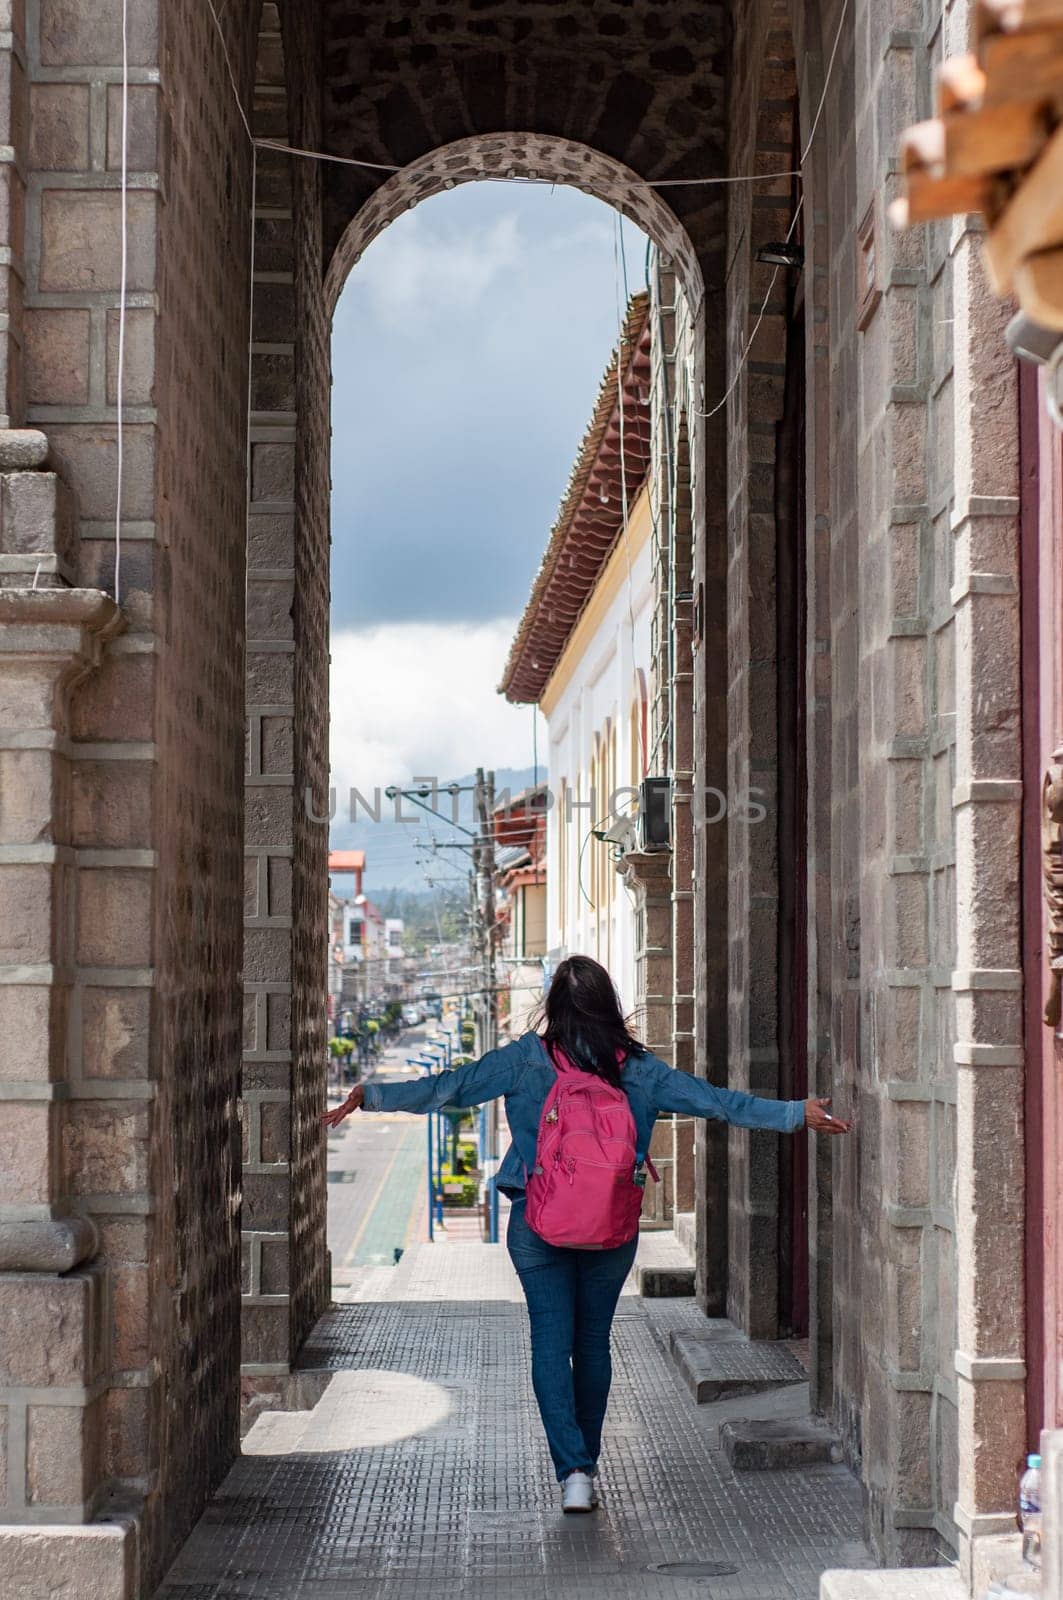 A pedestrian strolling under a pink archway amidst city buildings. by Raulmartin